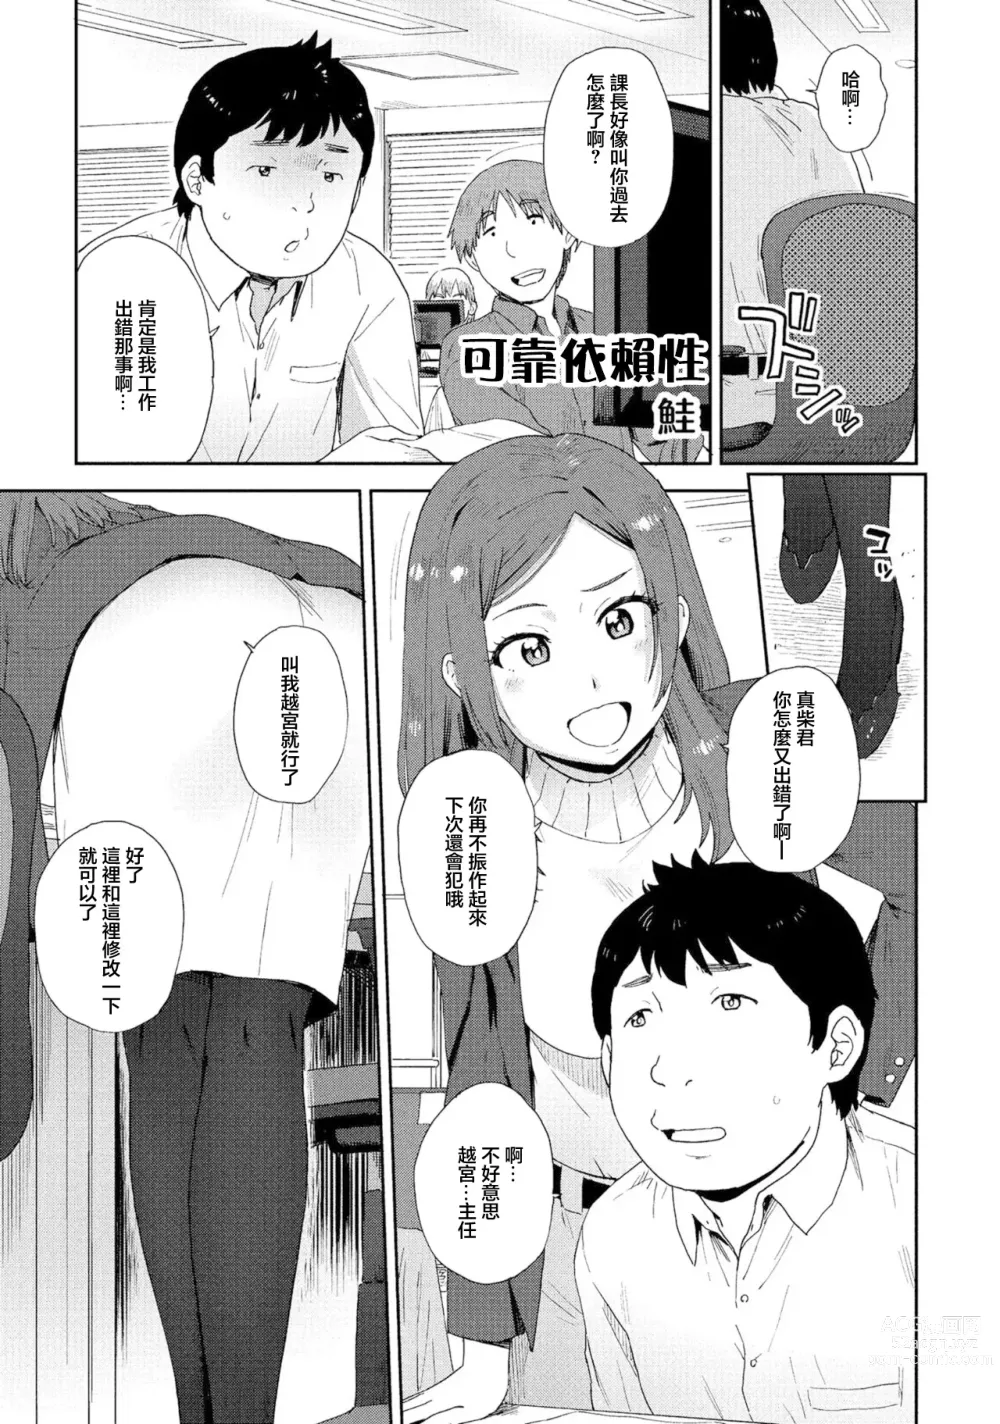 Page 1 of doujinshi 可靠依賴性